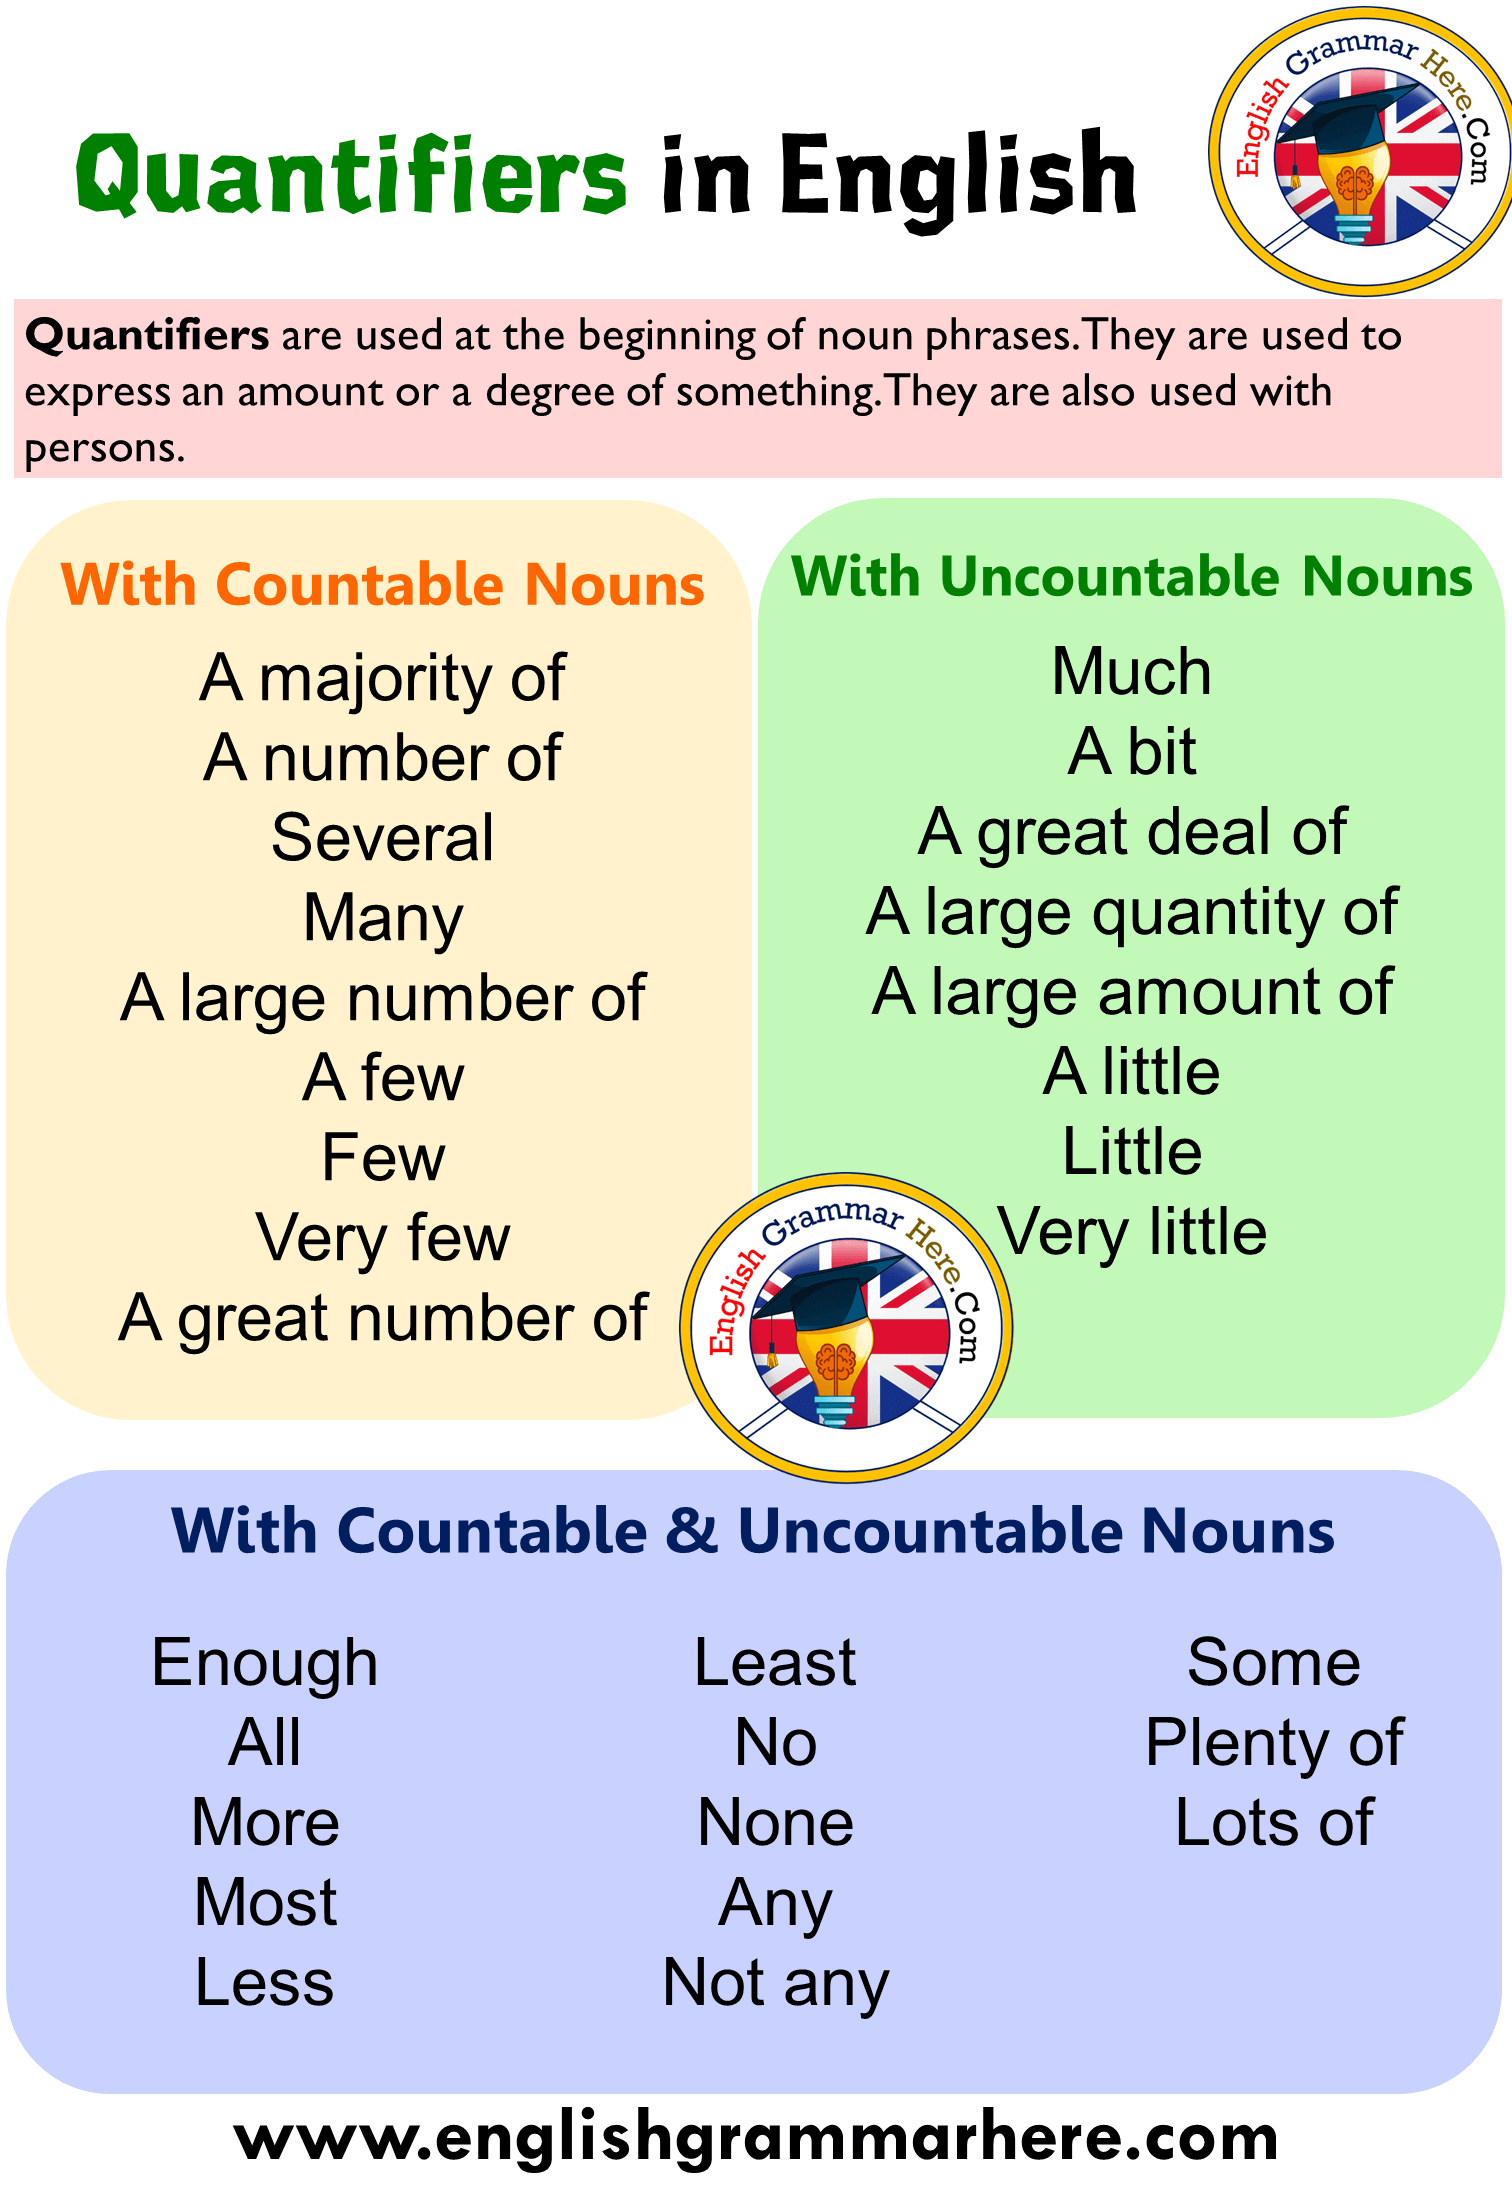 Quantifiers with Countable and Uncountable Nouns